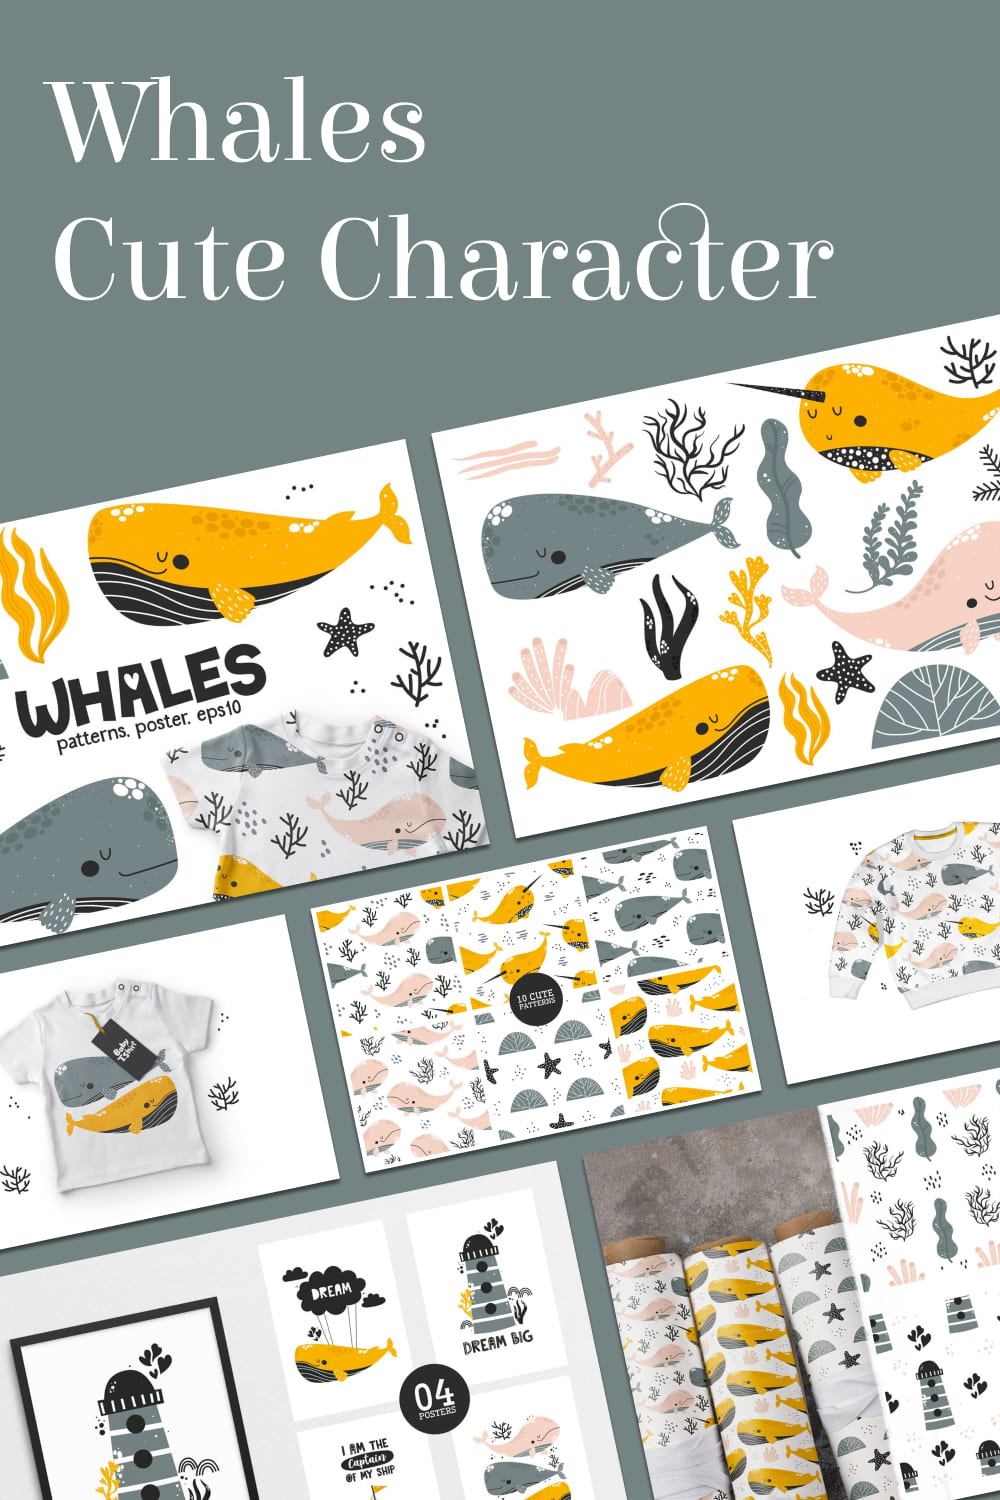 whales cute character graphics.